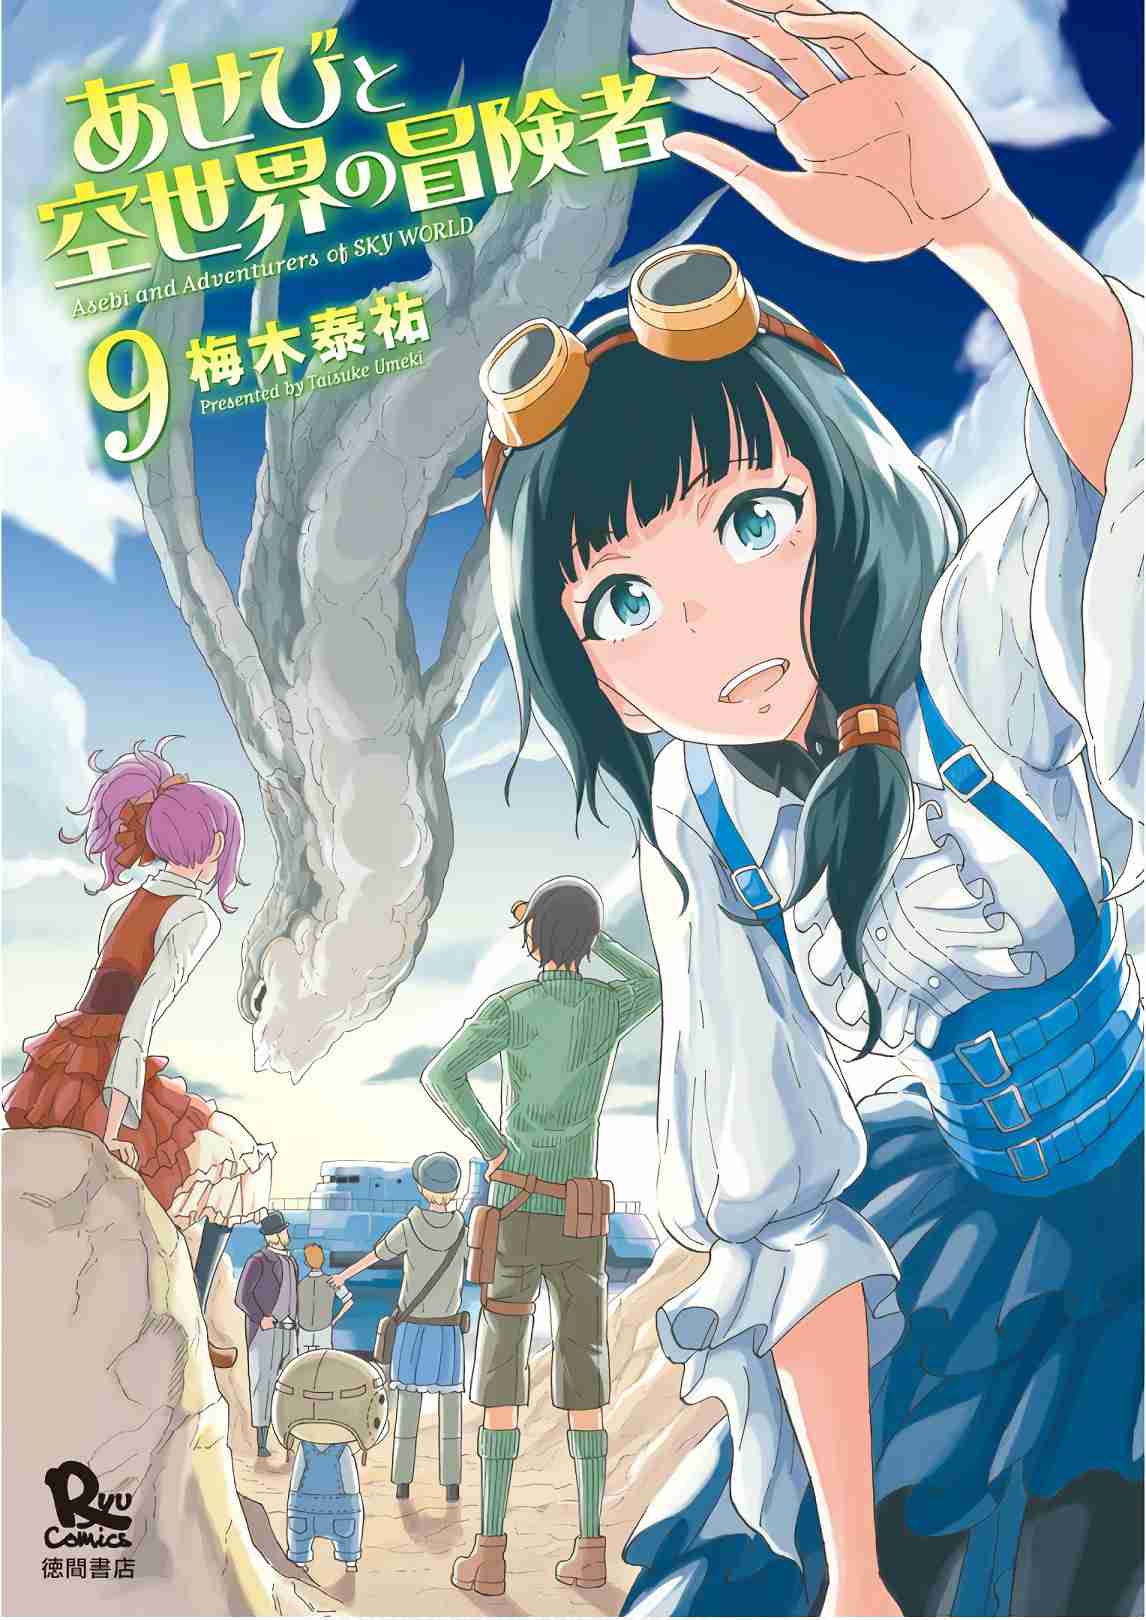 Asebi and Adventurers of Sky World Vol. 9 Ch. 45 Memories and faces